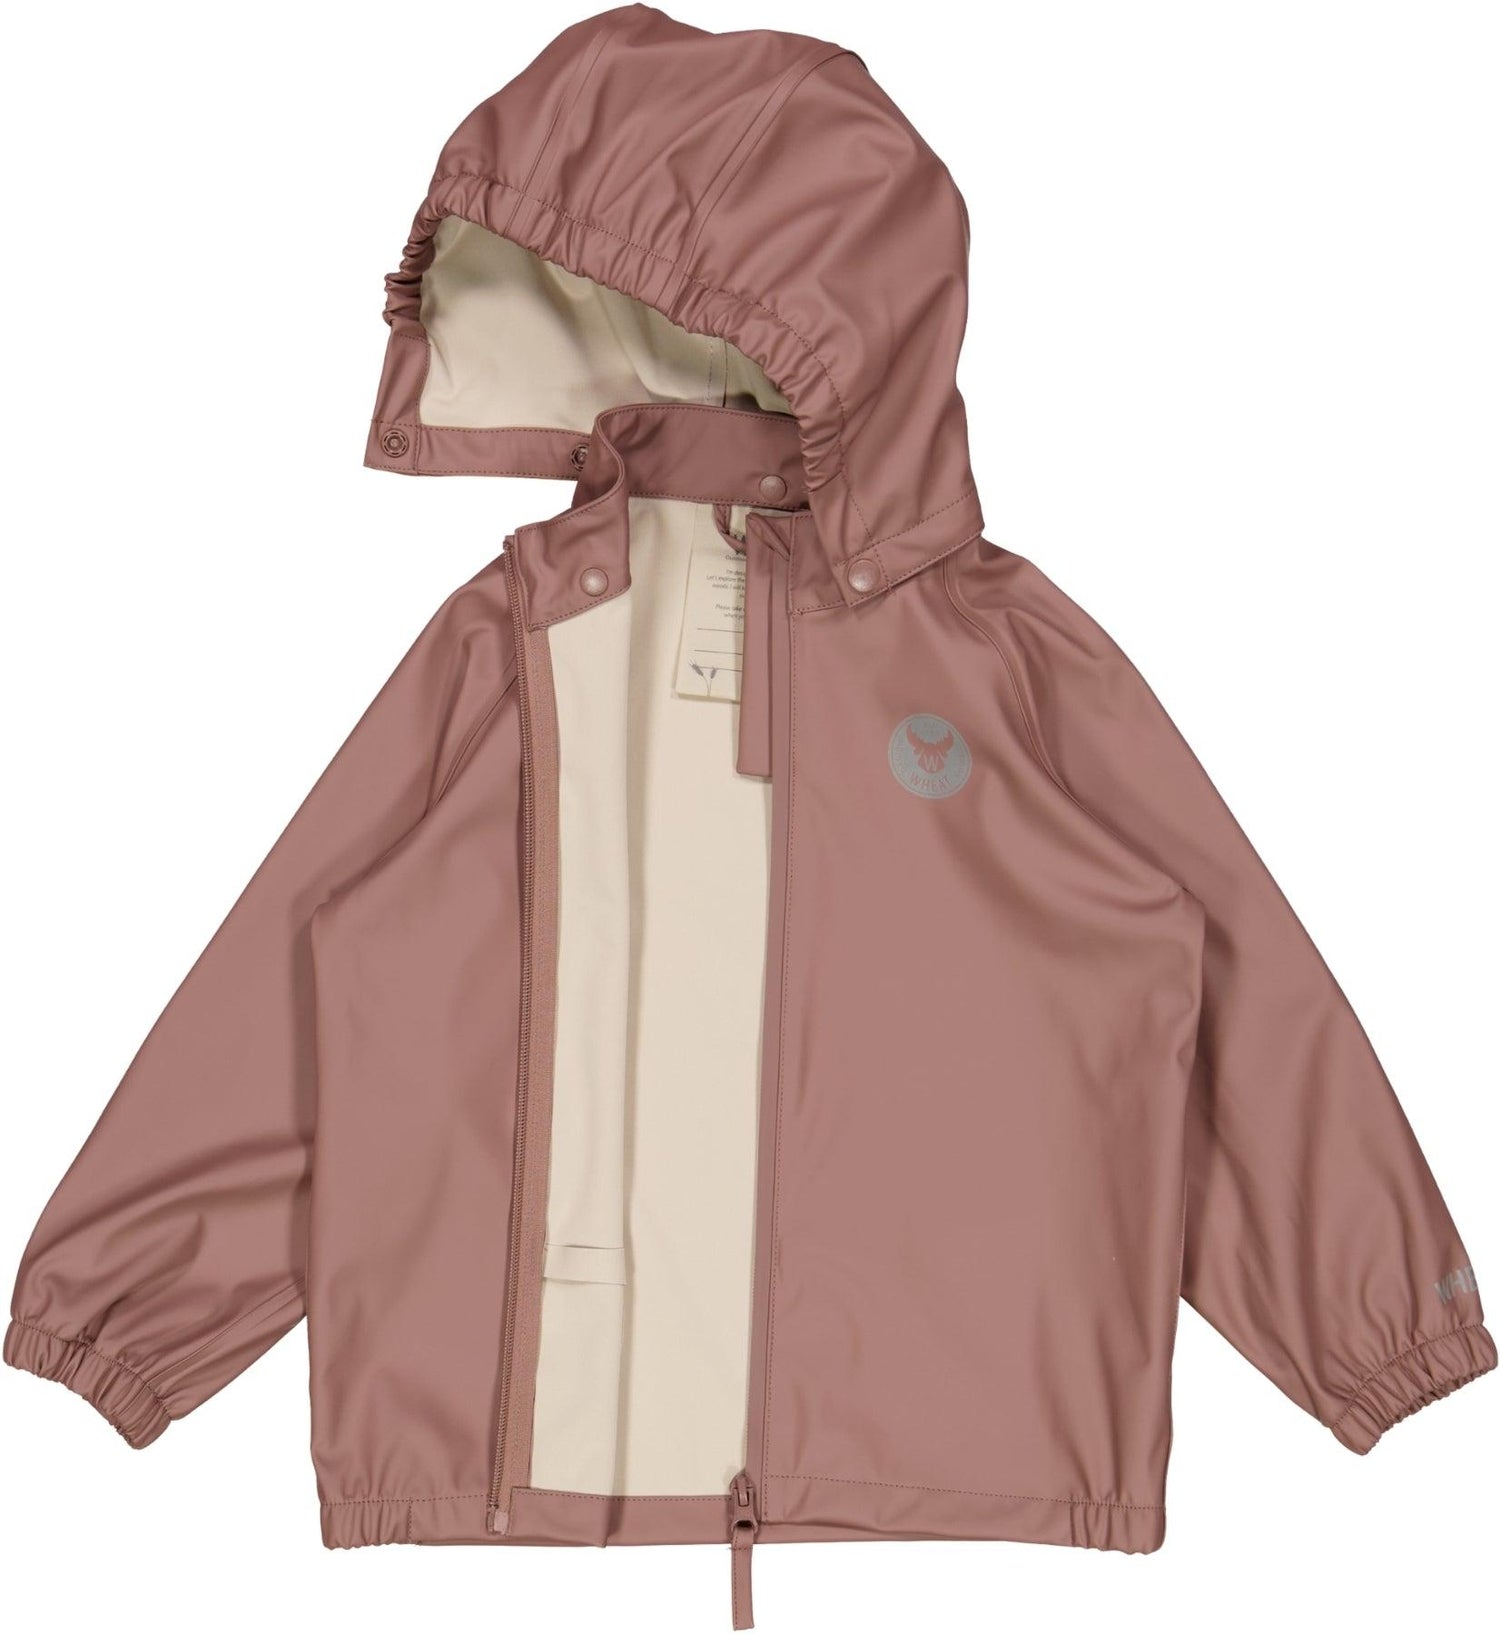 Regenbekleidung 'Charlie' • Dusty Lilac - The Little One • Family.Concept.Store. 